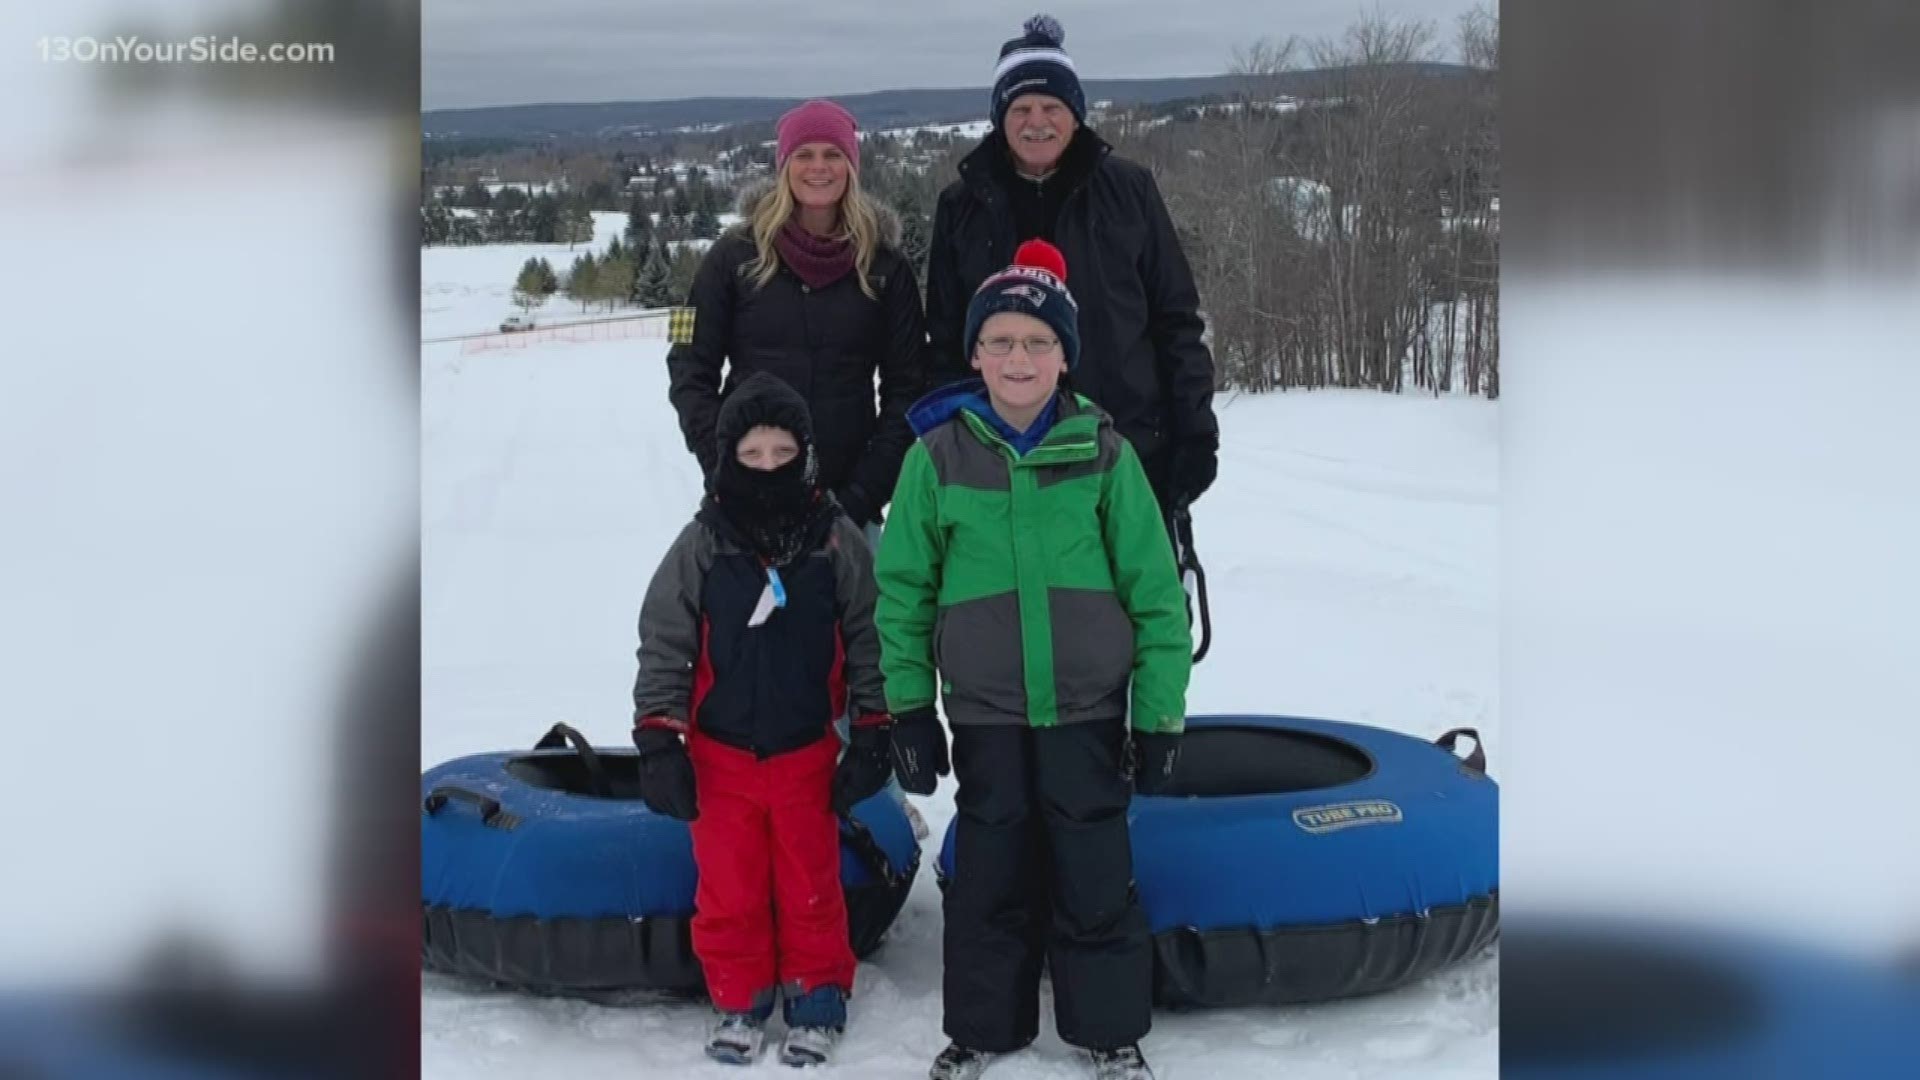 A Byron Center boy tried jumping onto a tube, but overshot it, faceplanting in the snow.